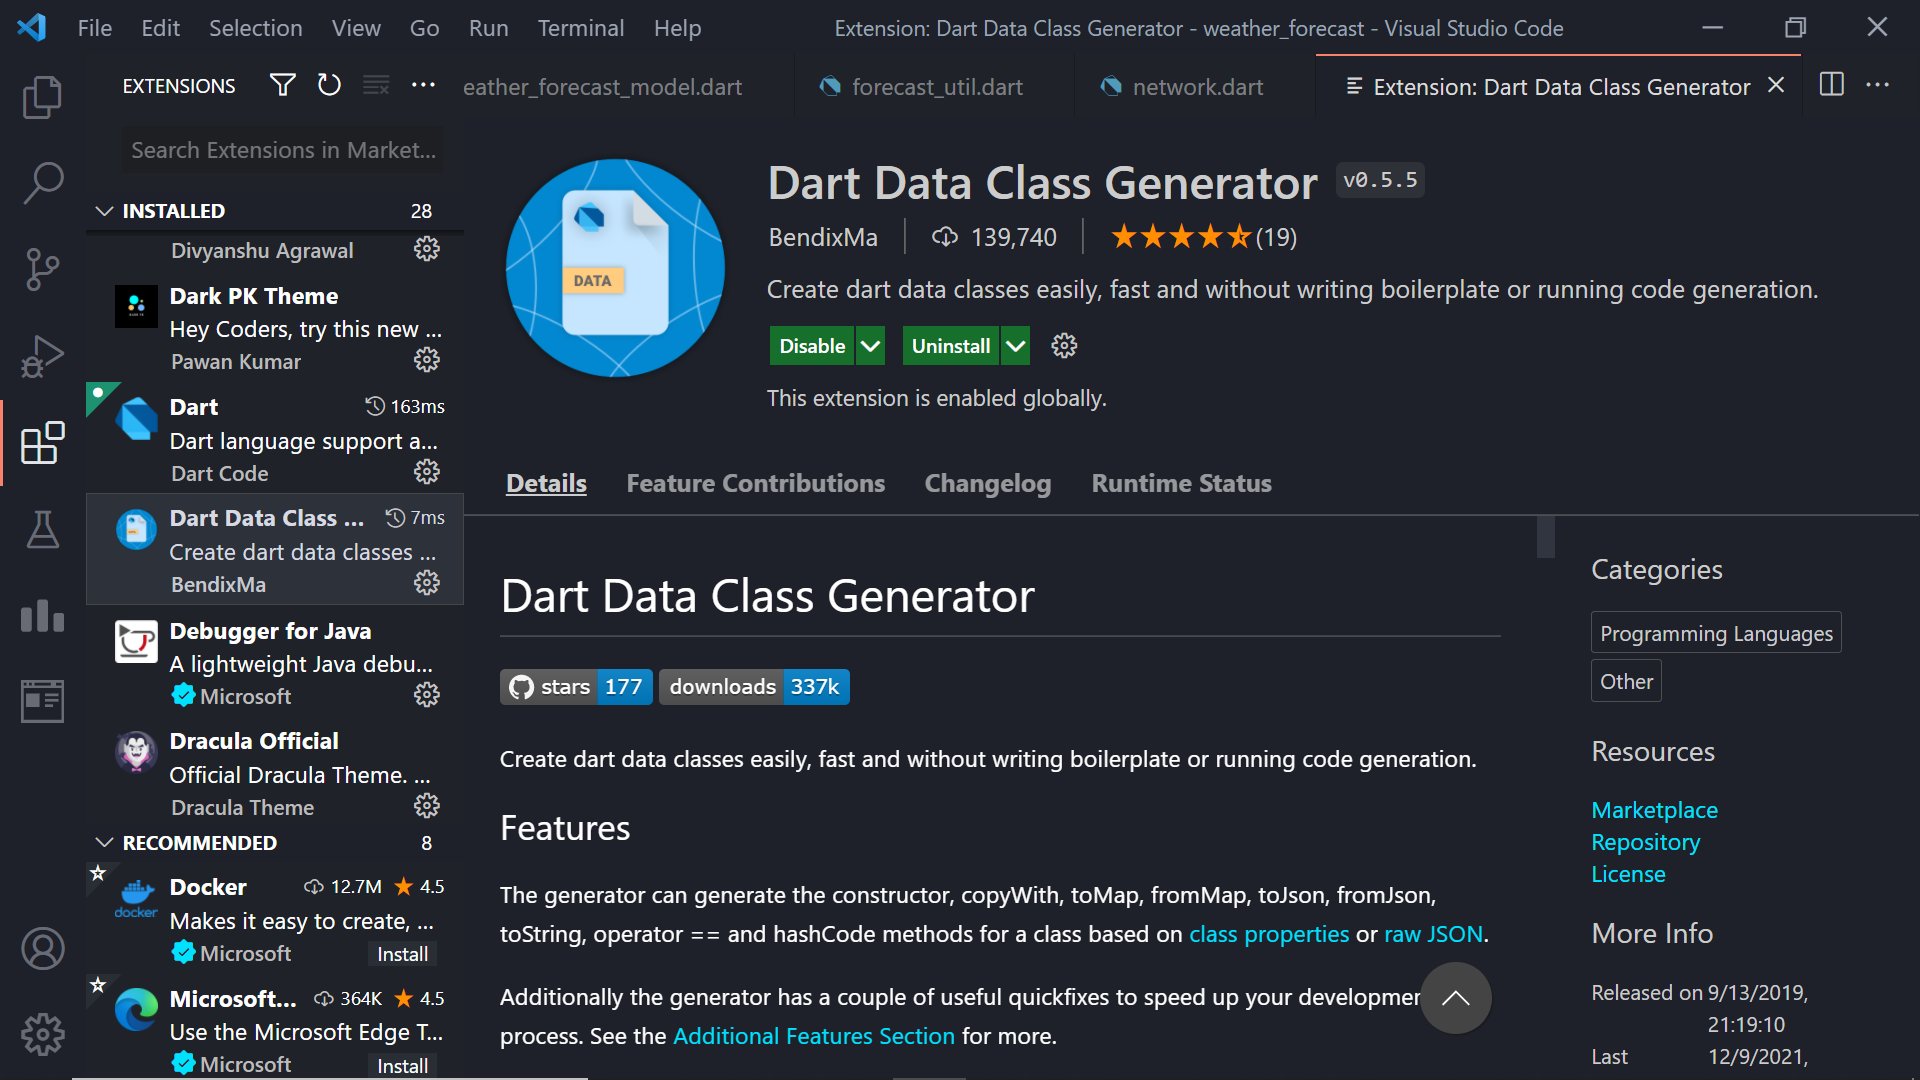 The church Consulate Practical Gantavya💙 on Twitter: "1. We can use a VS code extension called Dart Data  Class generator. It makes it really easy and fast to make dart classes.  https://t.co/b8XNPsFp1S" / Twitter